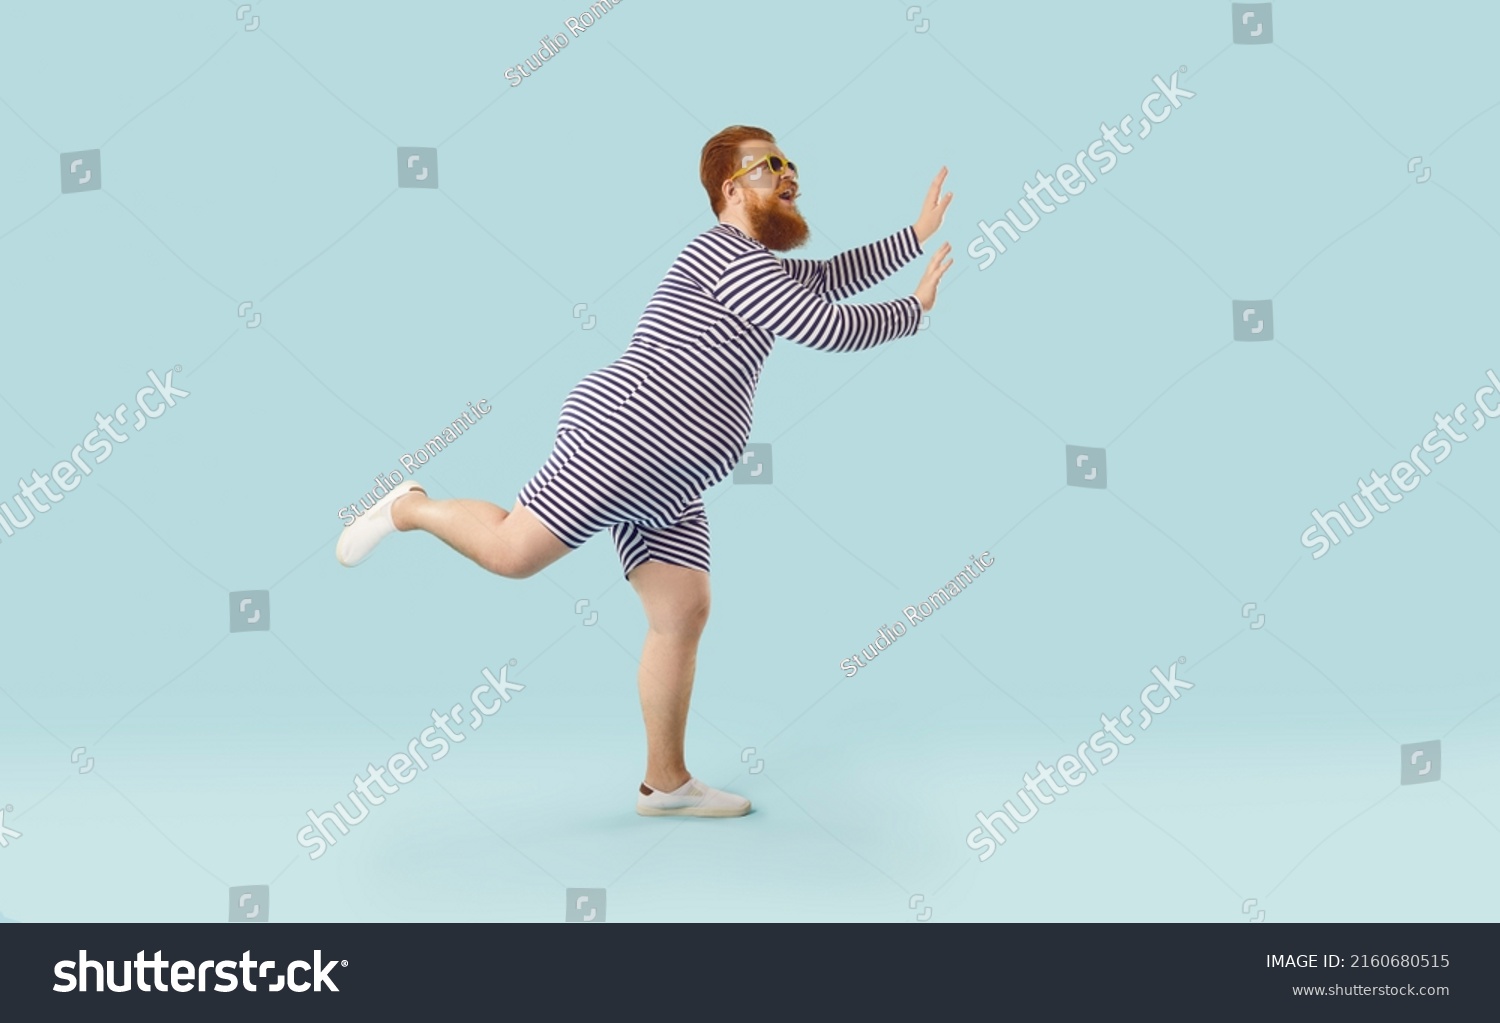 Profile view of funny fat ginger man wearing striped swimsuit and sunglasses dancing and having fun isolated on light blue colour background. Summer holiday, vacation, beach party concept #2160680515